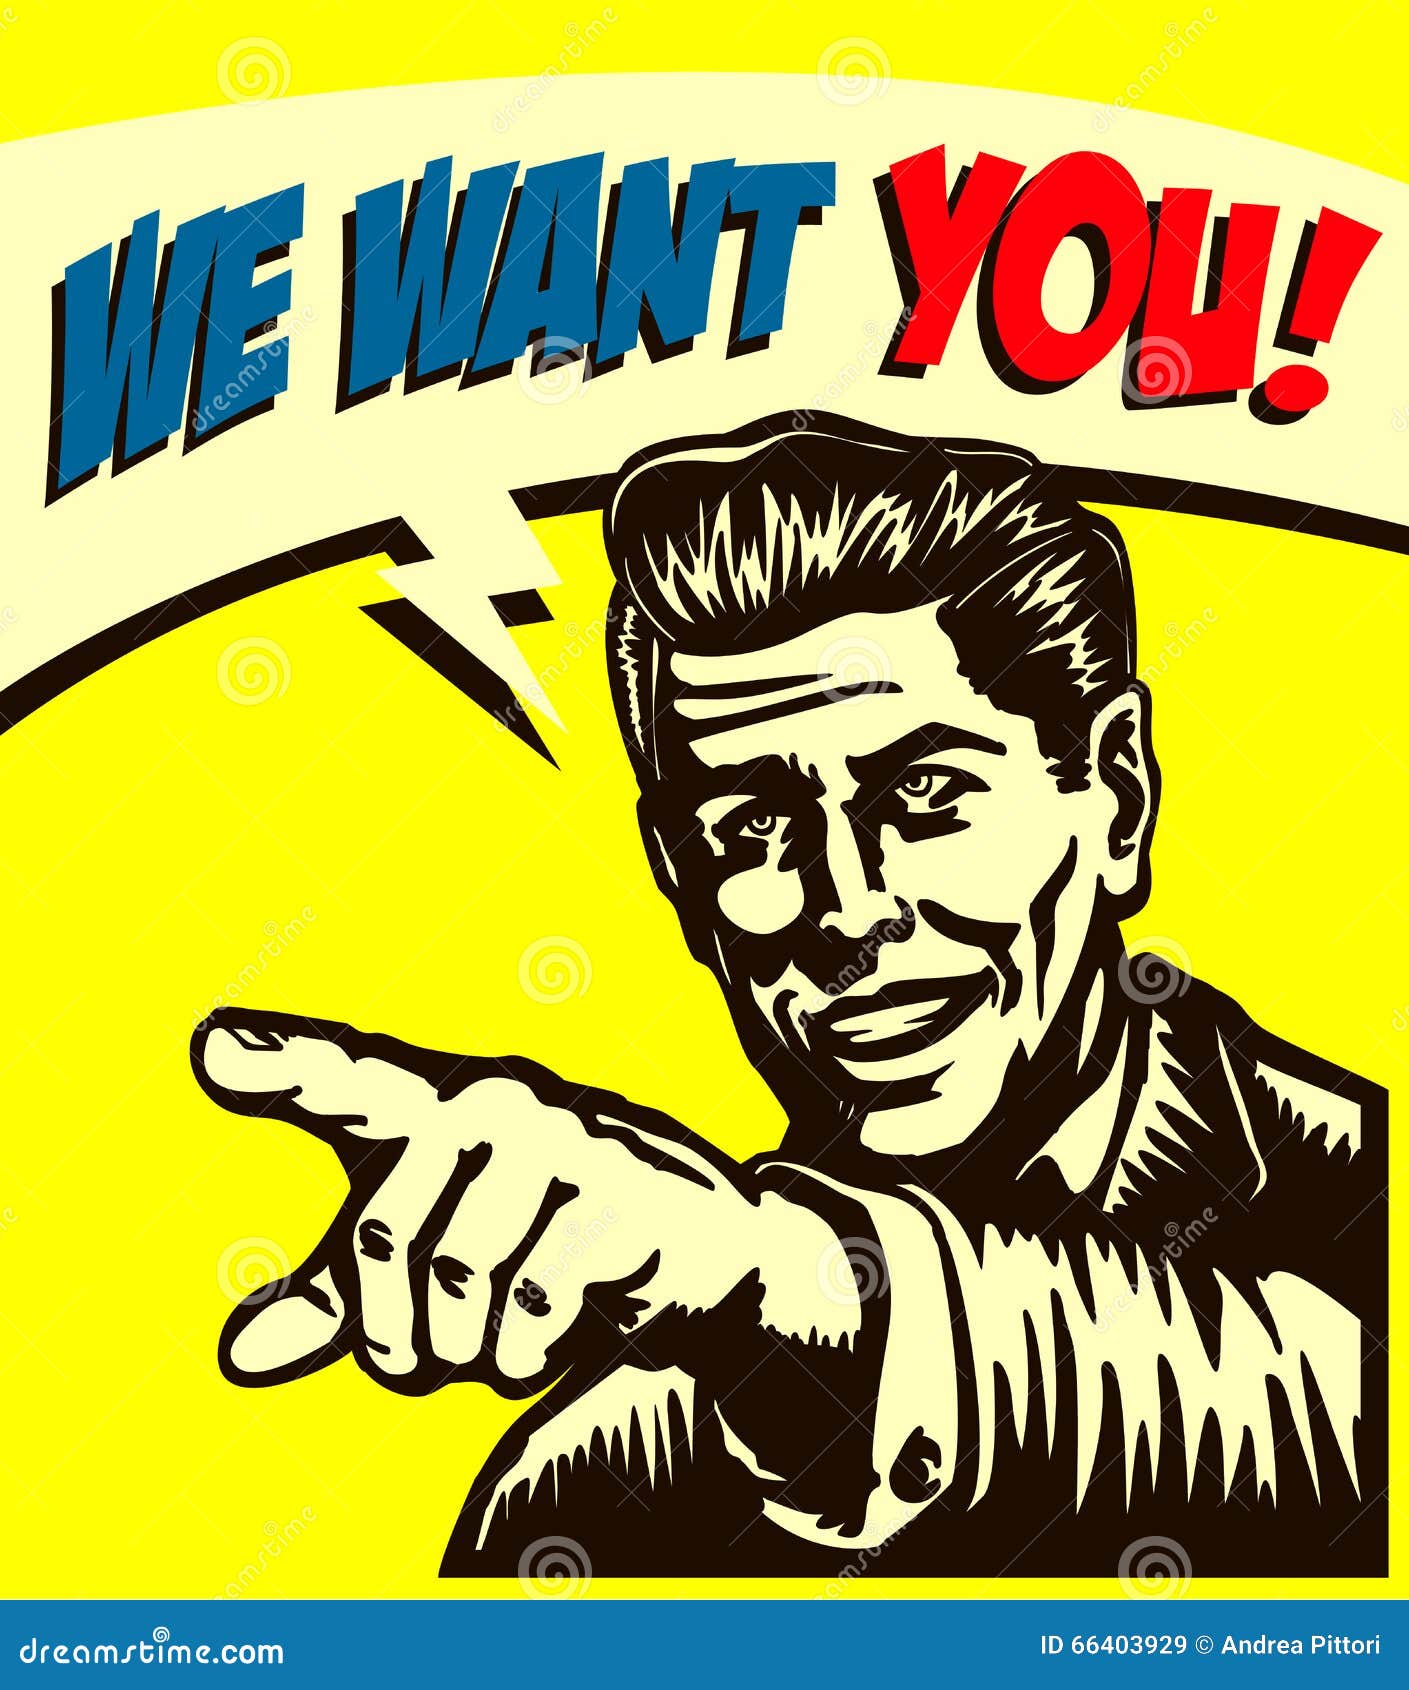 want you! retro businessman with pointing finger, job vacancy we're hiring now sign, comic book style 